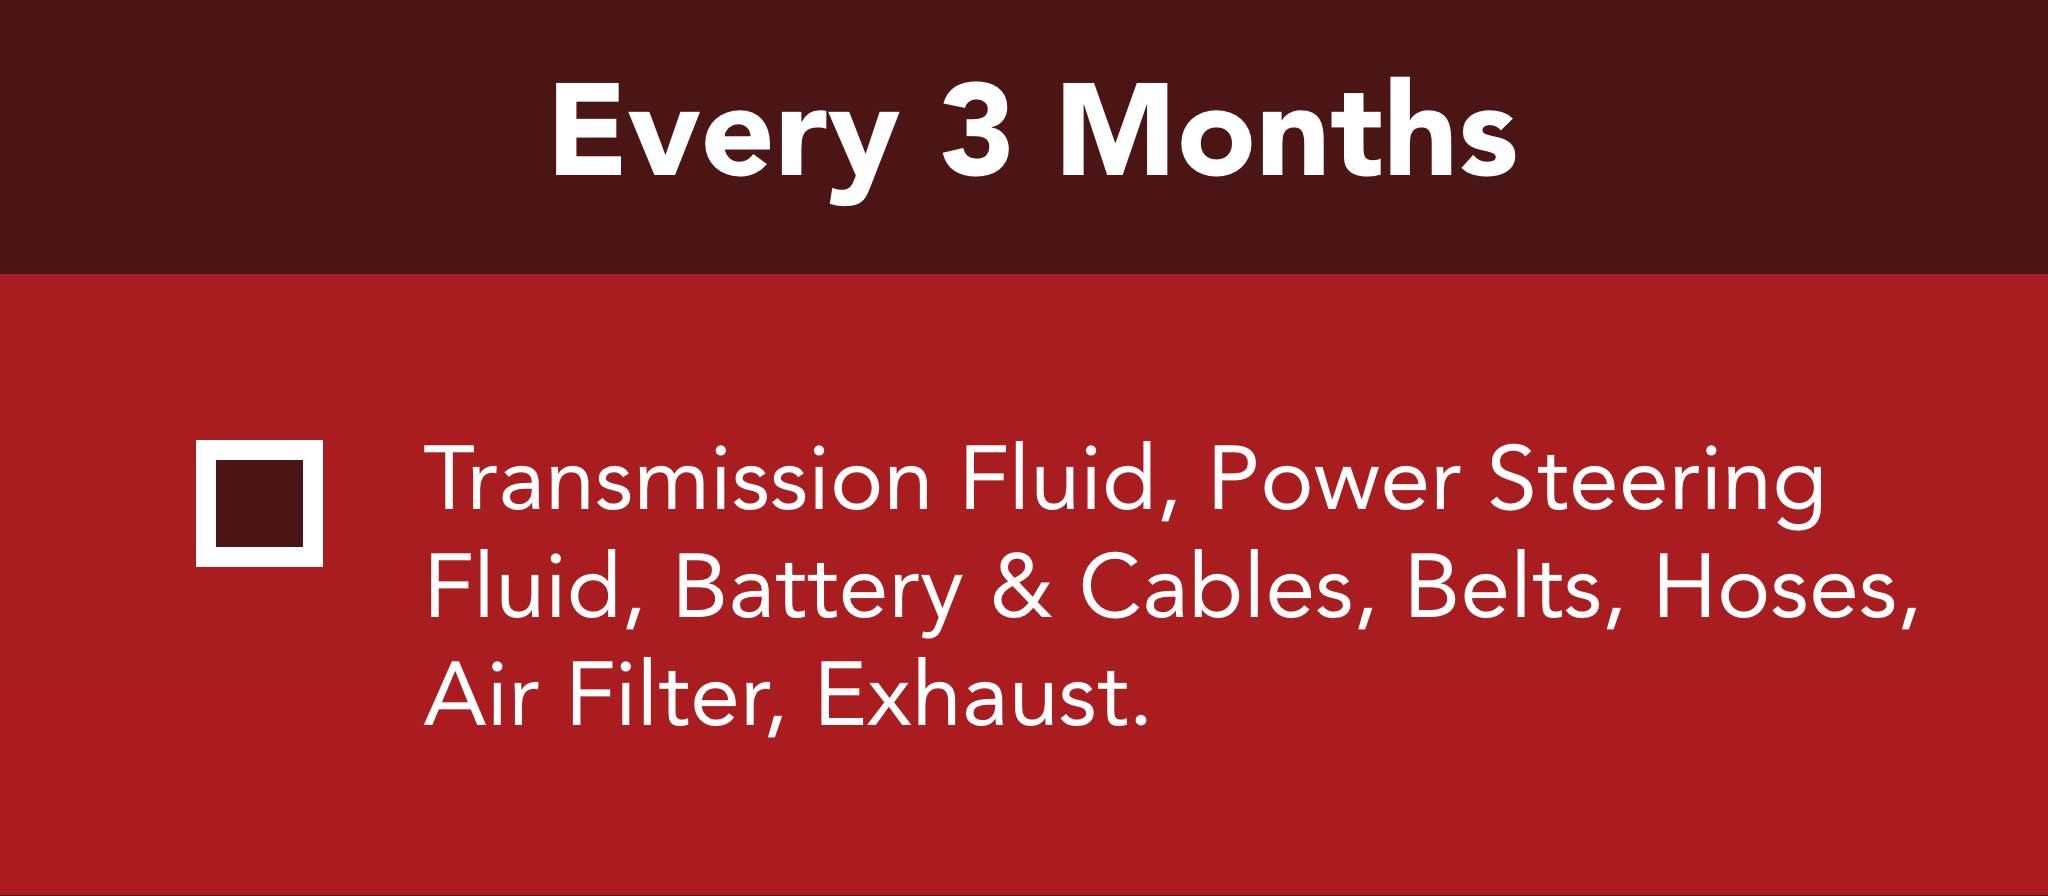 Transmission Fluid, Power Steering  Fluid, Battery & Cables, Belts, Hoses,  Air Filter, Exhaust.